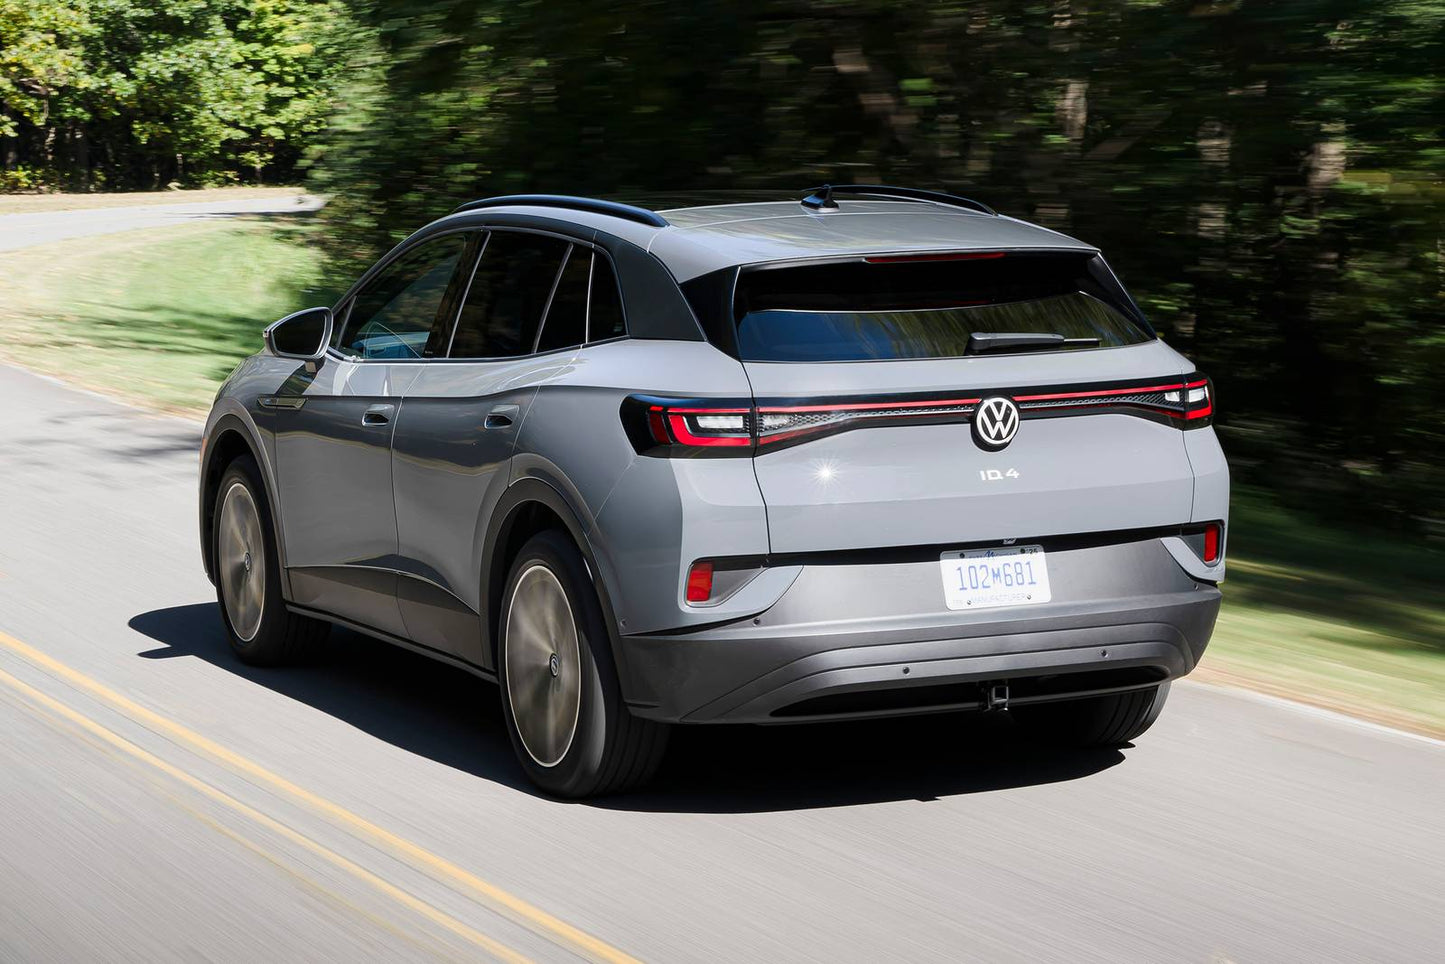 2023 Volkswagen ID.4 Pro 4dr SUV w/LG Energy Solution Battery, 135kW DC Fast Charging Capability (electric DD)